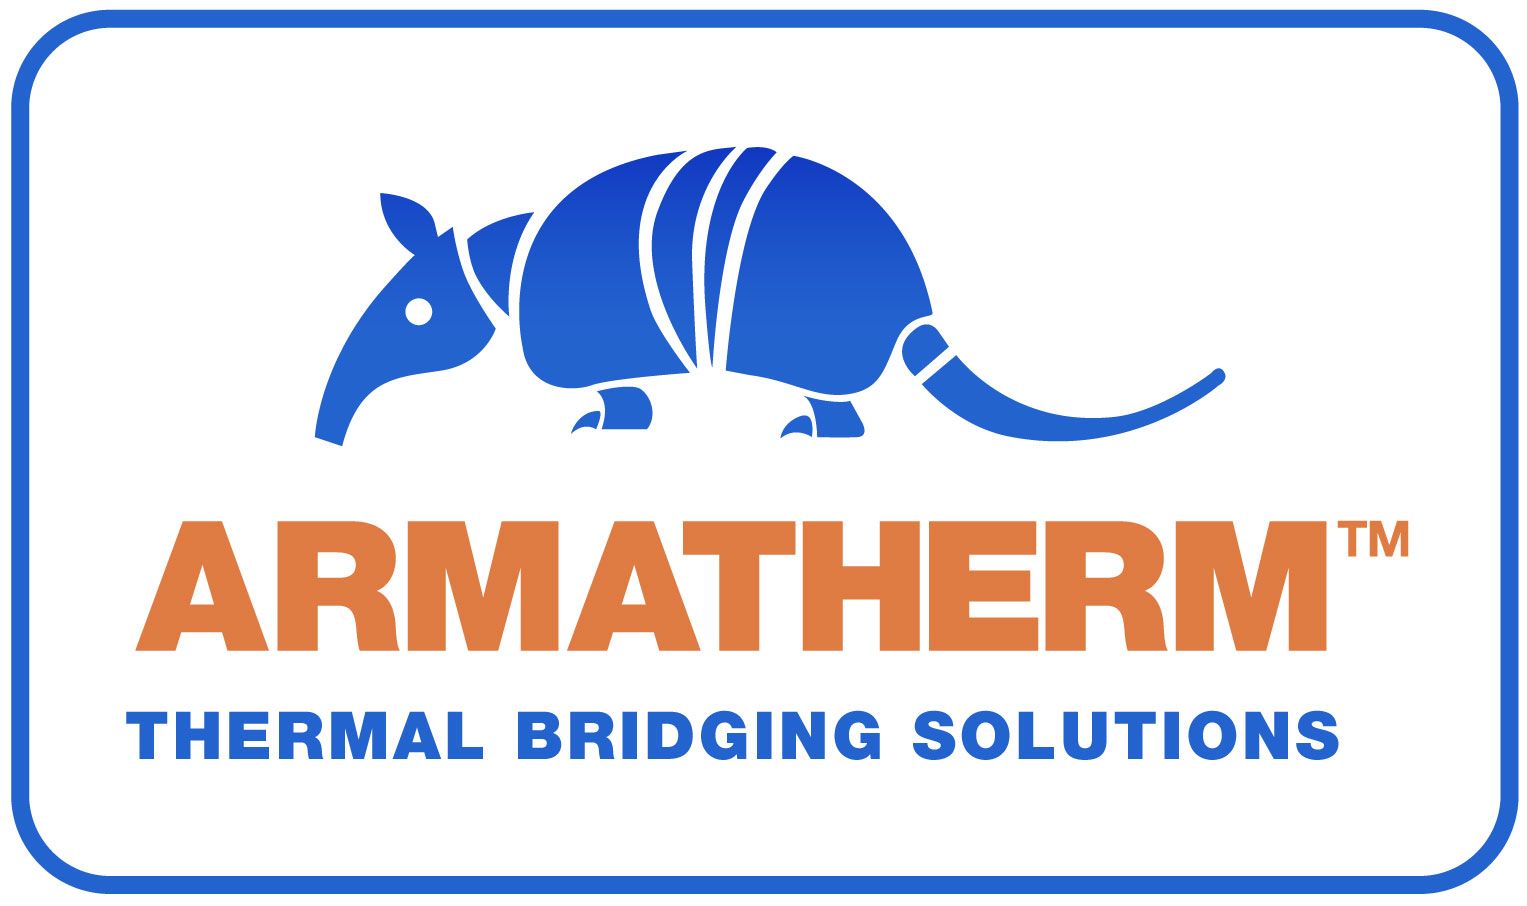 Armatherm - Thermal Bridging Solutions